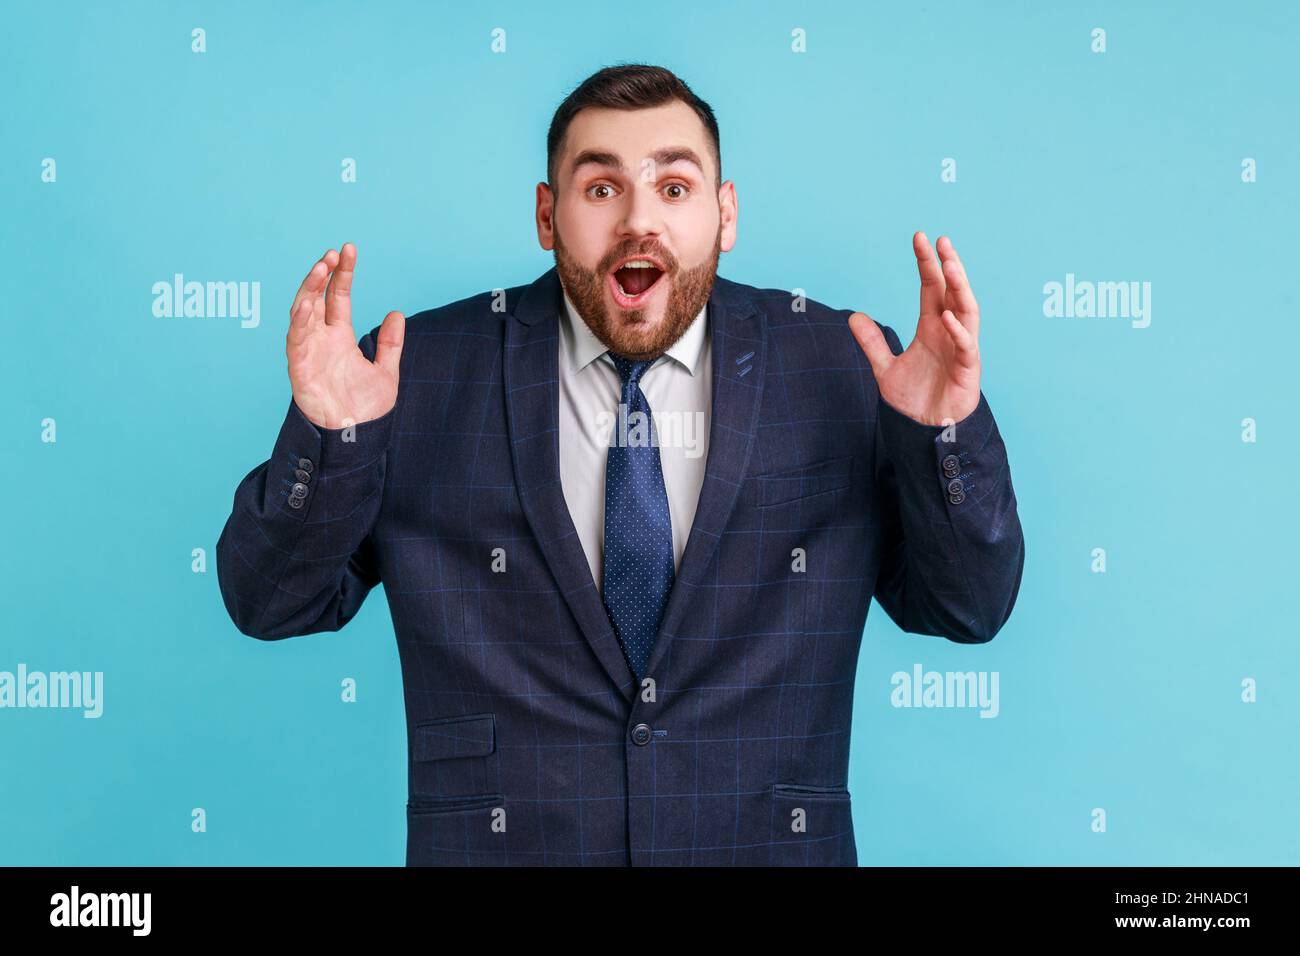 Wow, it's unbelievable. Surprised bearded man in official style suit staring at camera with widely open mouth and big eyes, raising arms in amazement. Indoor studio shot isolated on blue background. Stock Photo